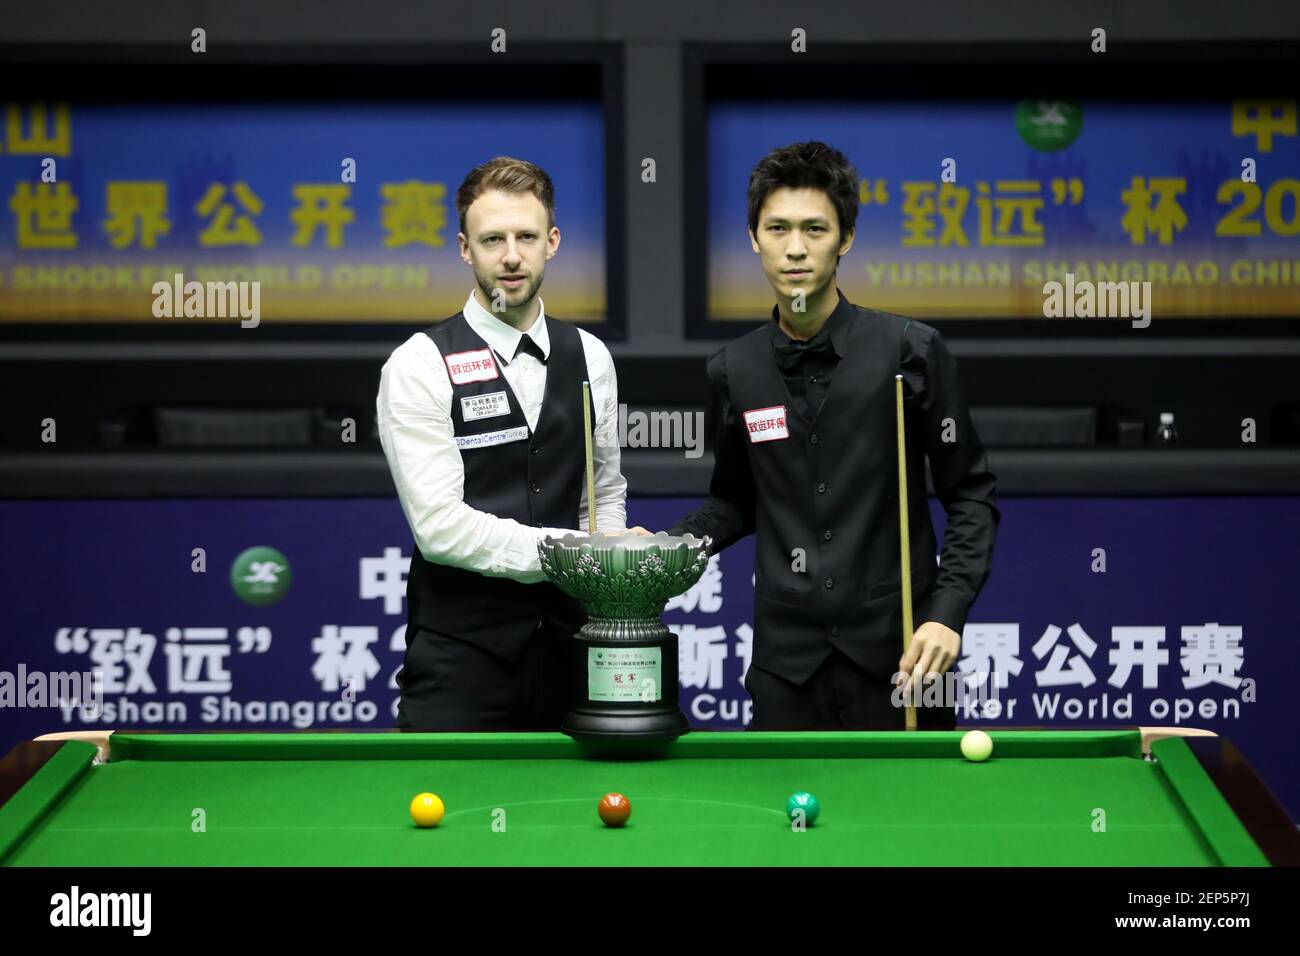 Judd Trump of England, left, shakes hands with Thepchaiya Un-Nooh of Thailand, right, before the final of 2019 World Open in Yushan county, Shangrao city, east Chinas Jiangxi province, 3 November 2019.